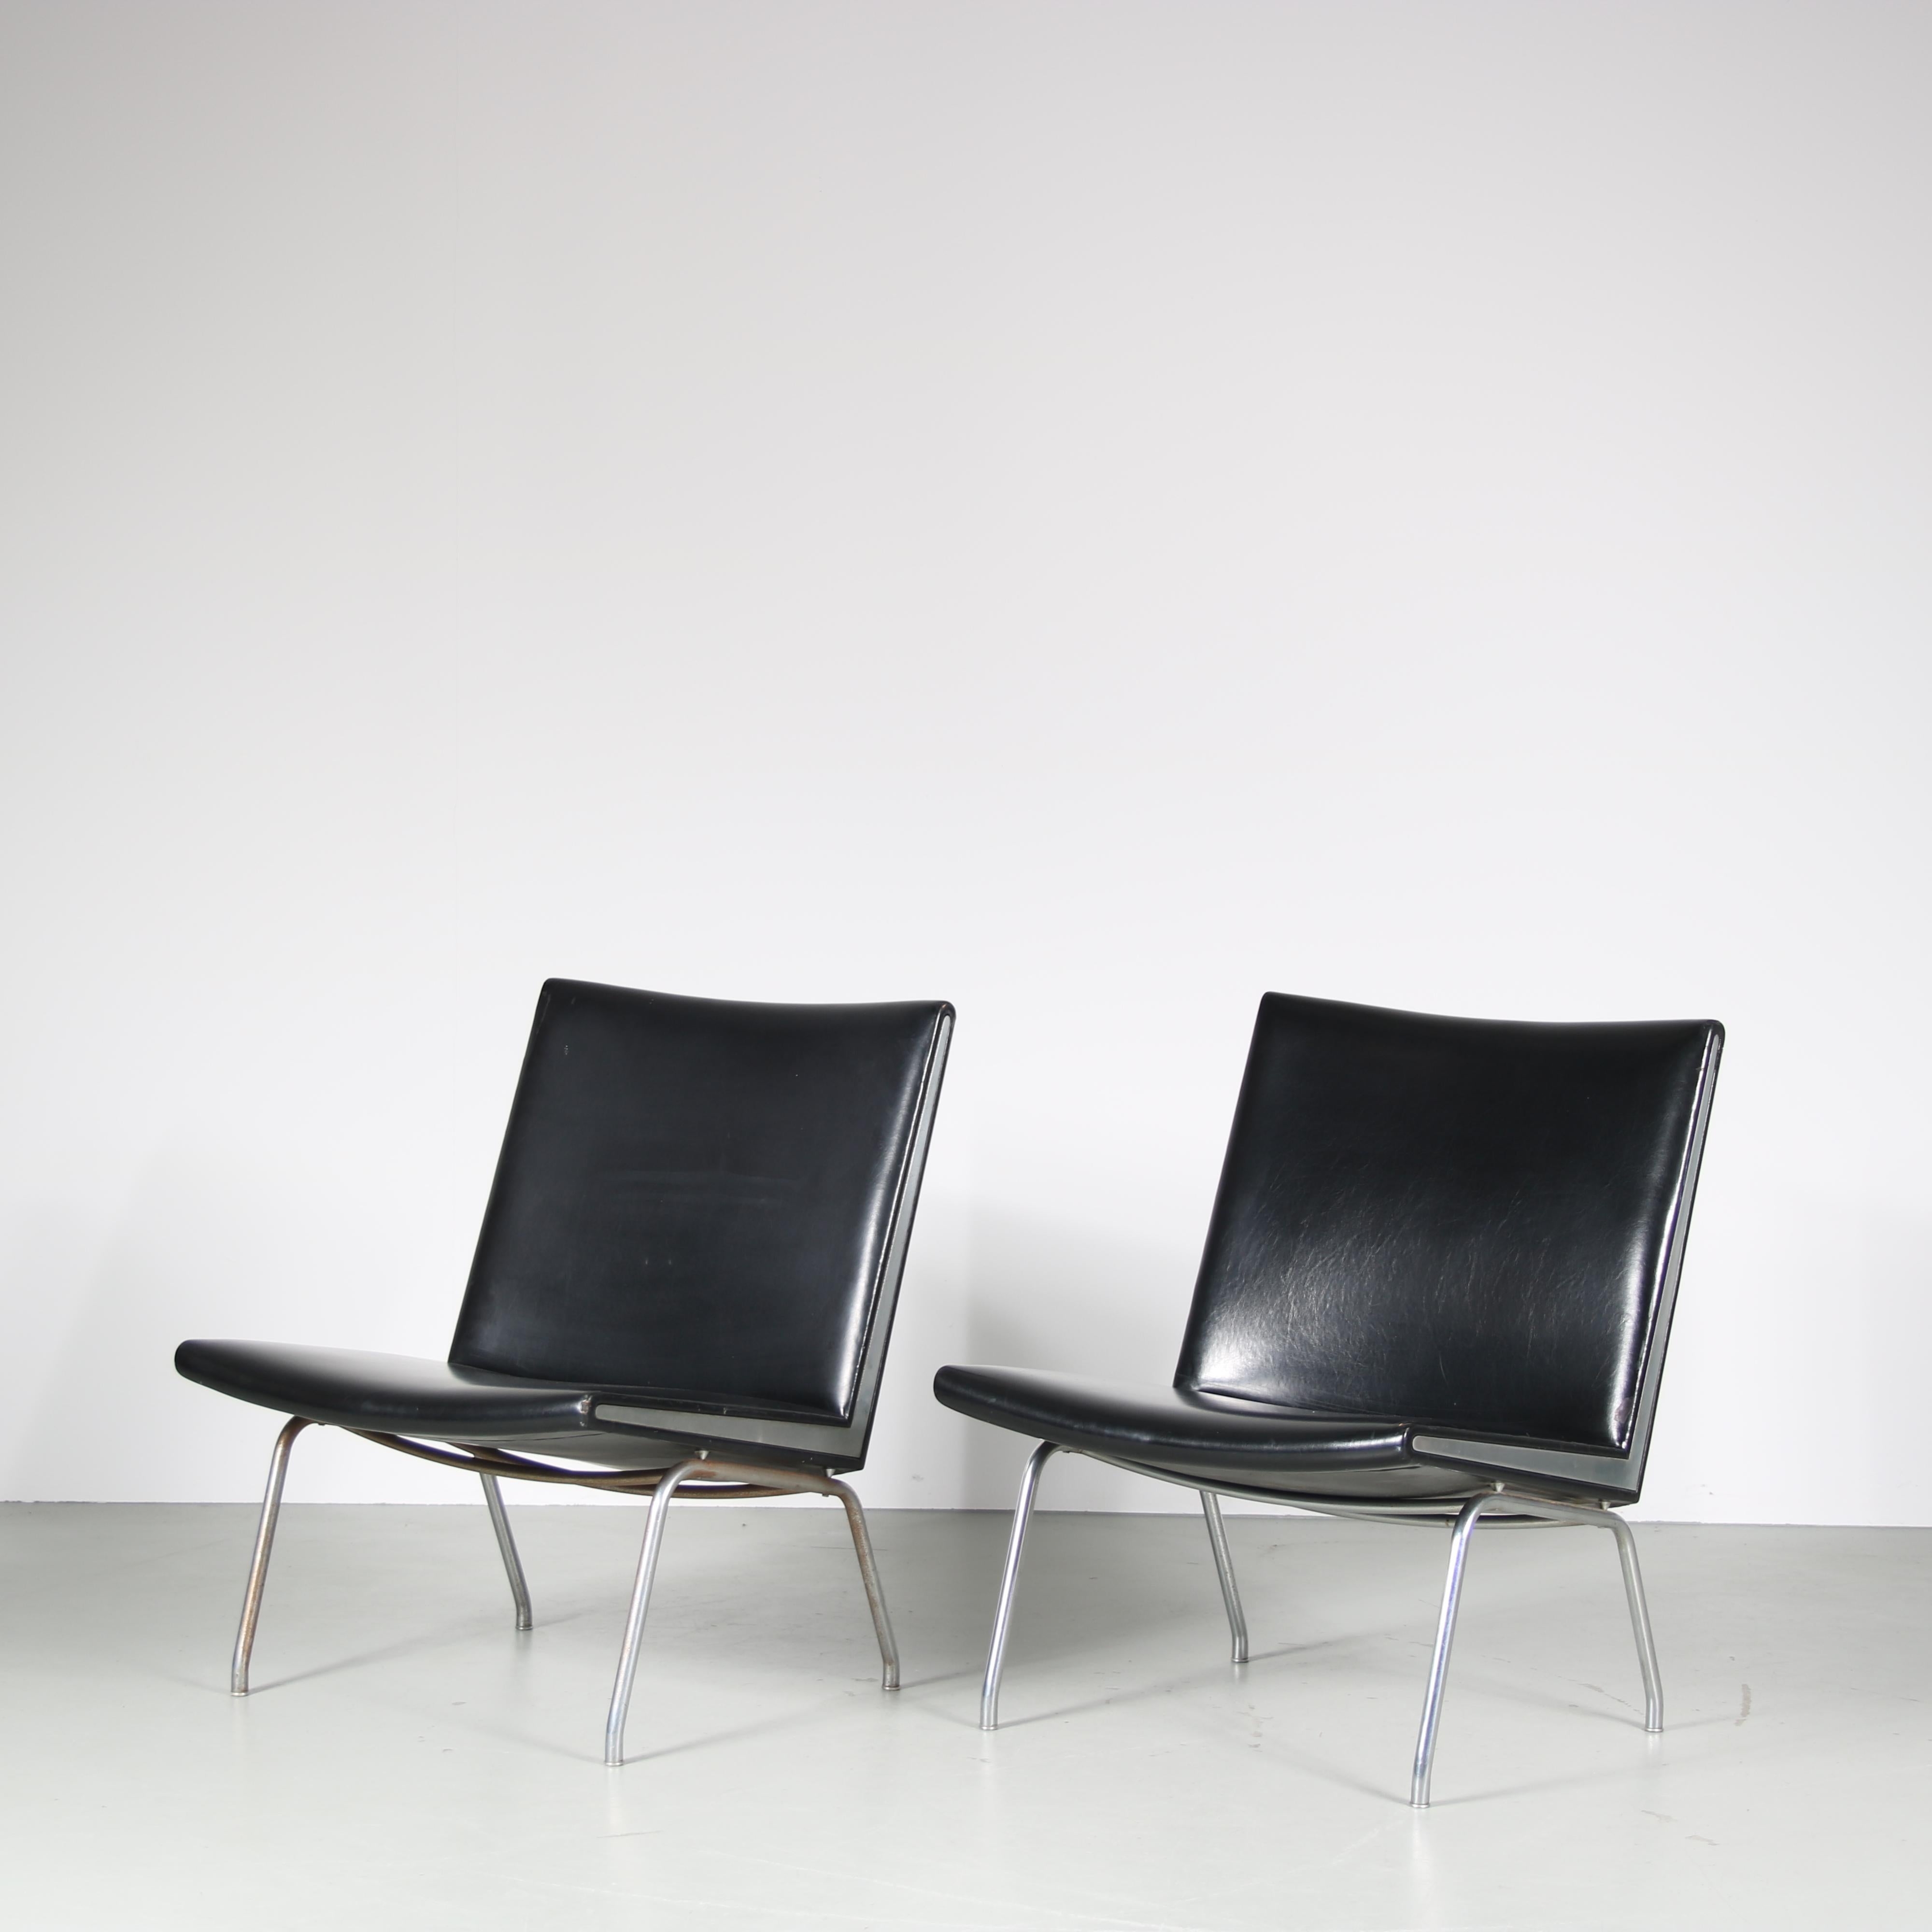 1960s Pair of lounge chairs on chrome metal base with black skai upholstery and chrome details, model Airport / Hans J. Wegner / AP Stolen, Denmark

A pair of “Airport” chairs designed Hans J. Wegner and manufactured by AP Stolen in Denmark around